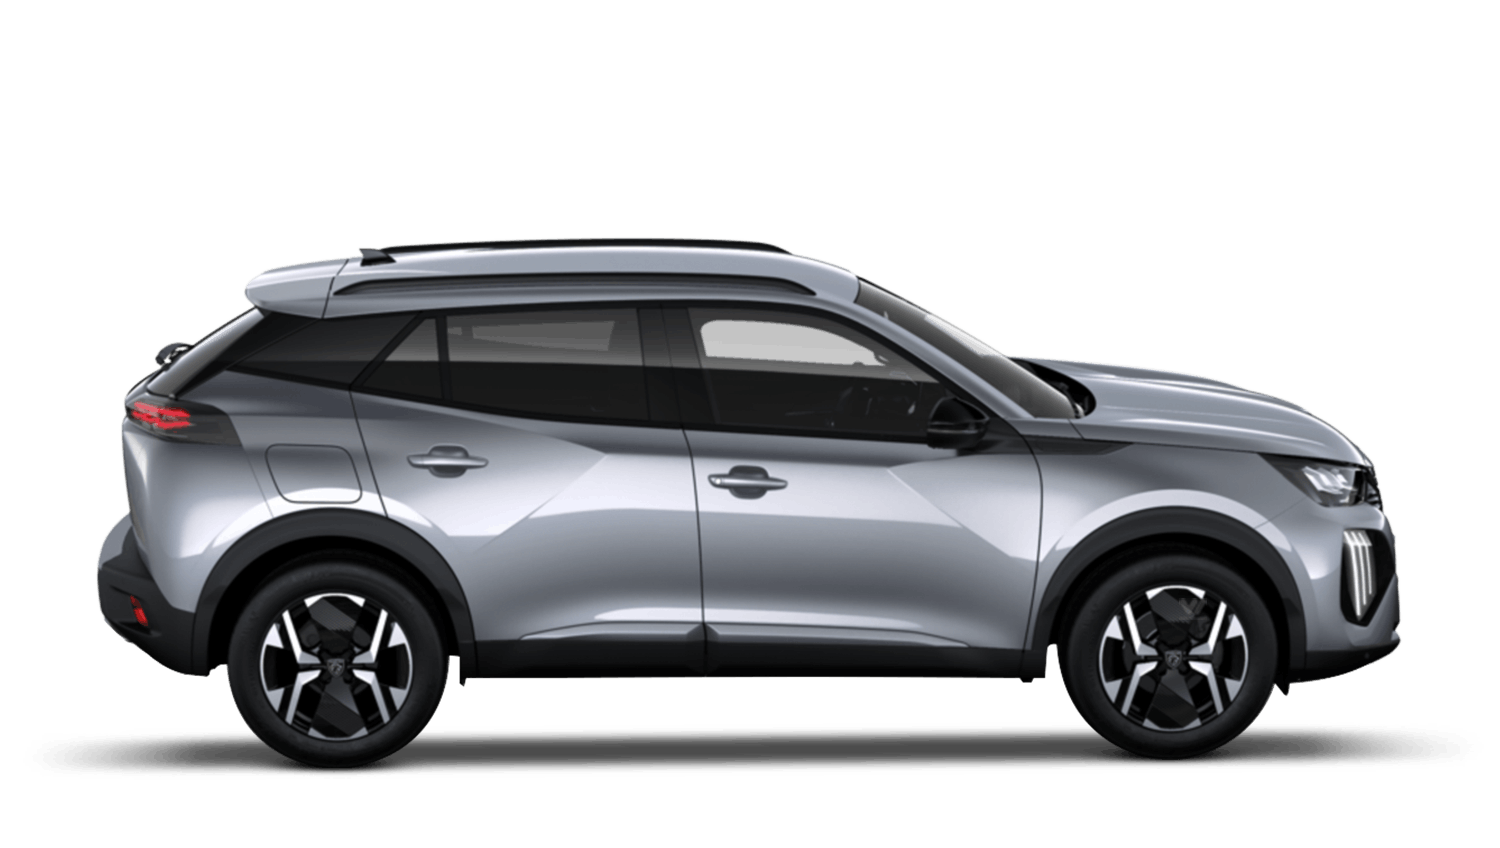 PEUGEOT 2008 ALLURE SUV BUSINESS CONTRACT HIRE